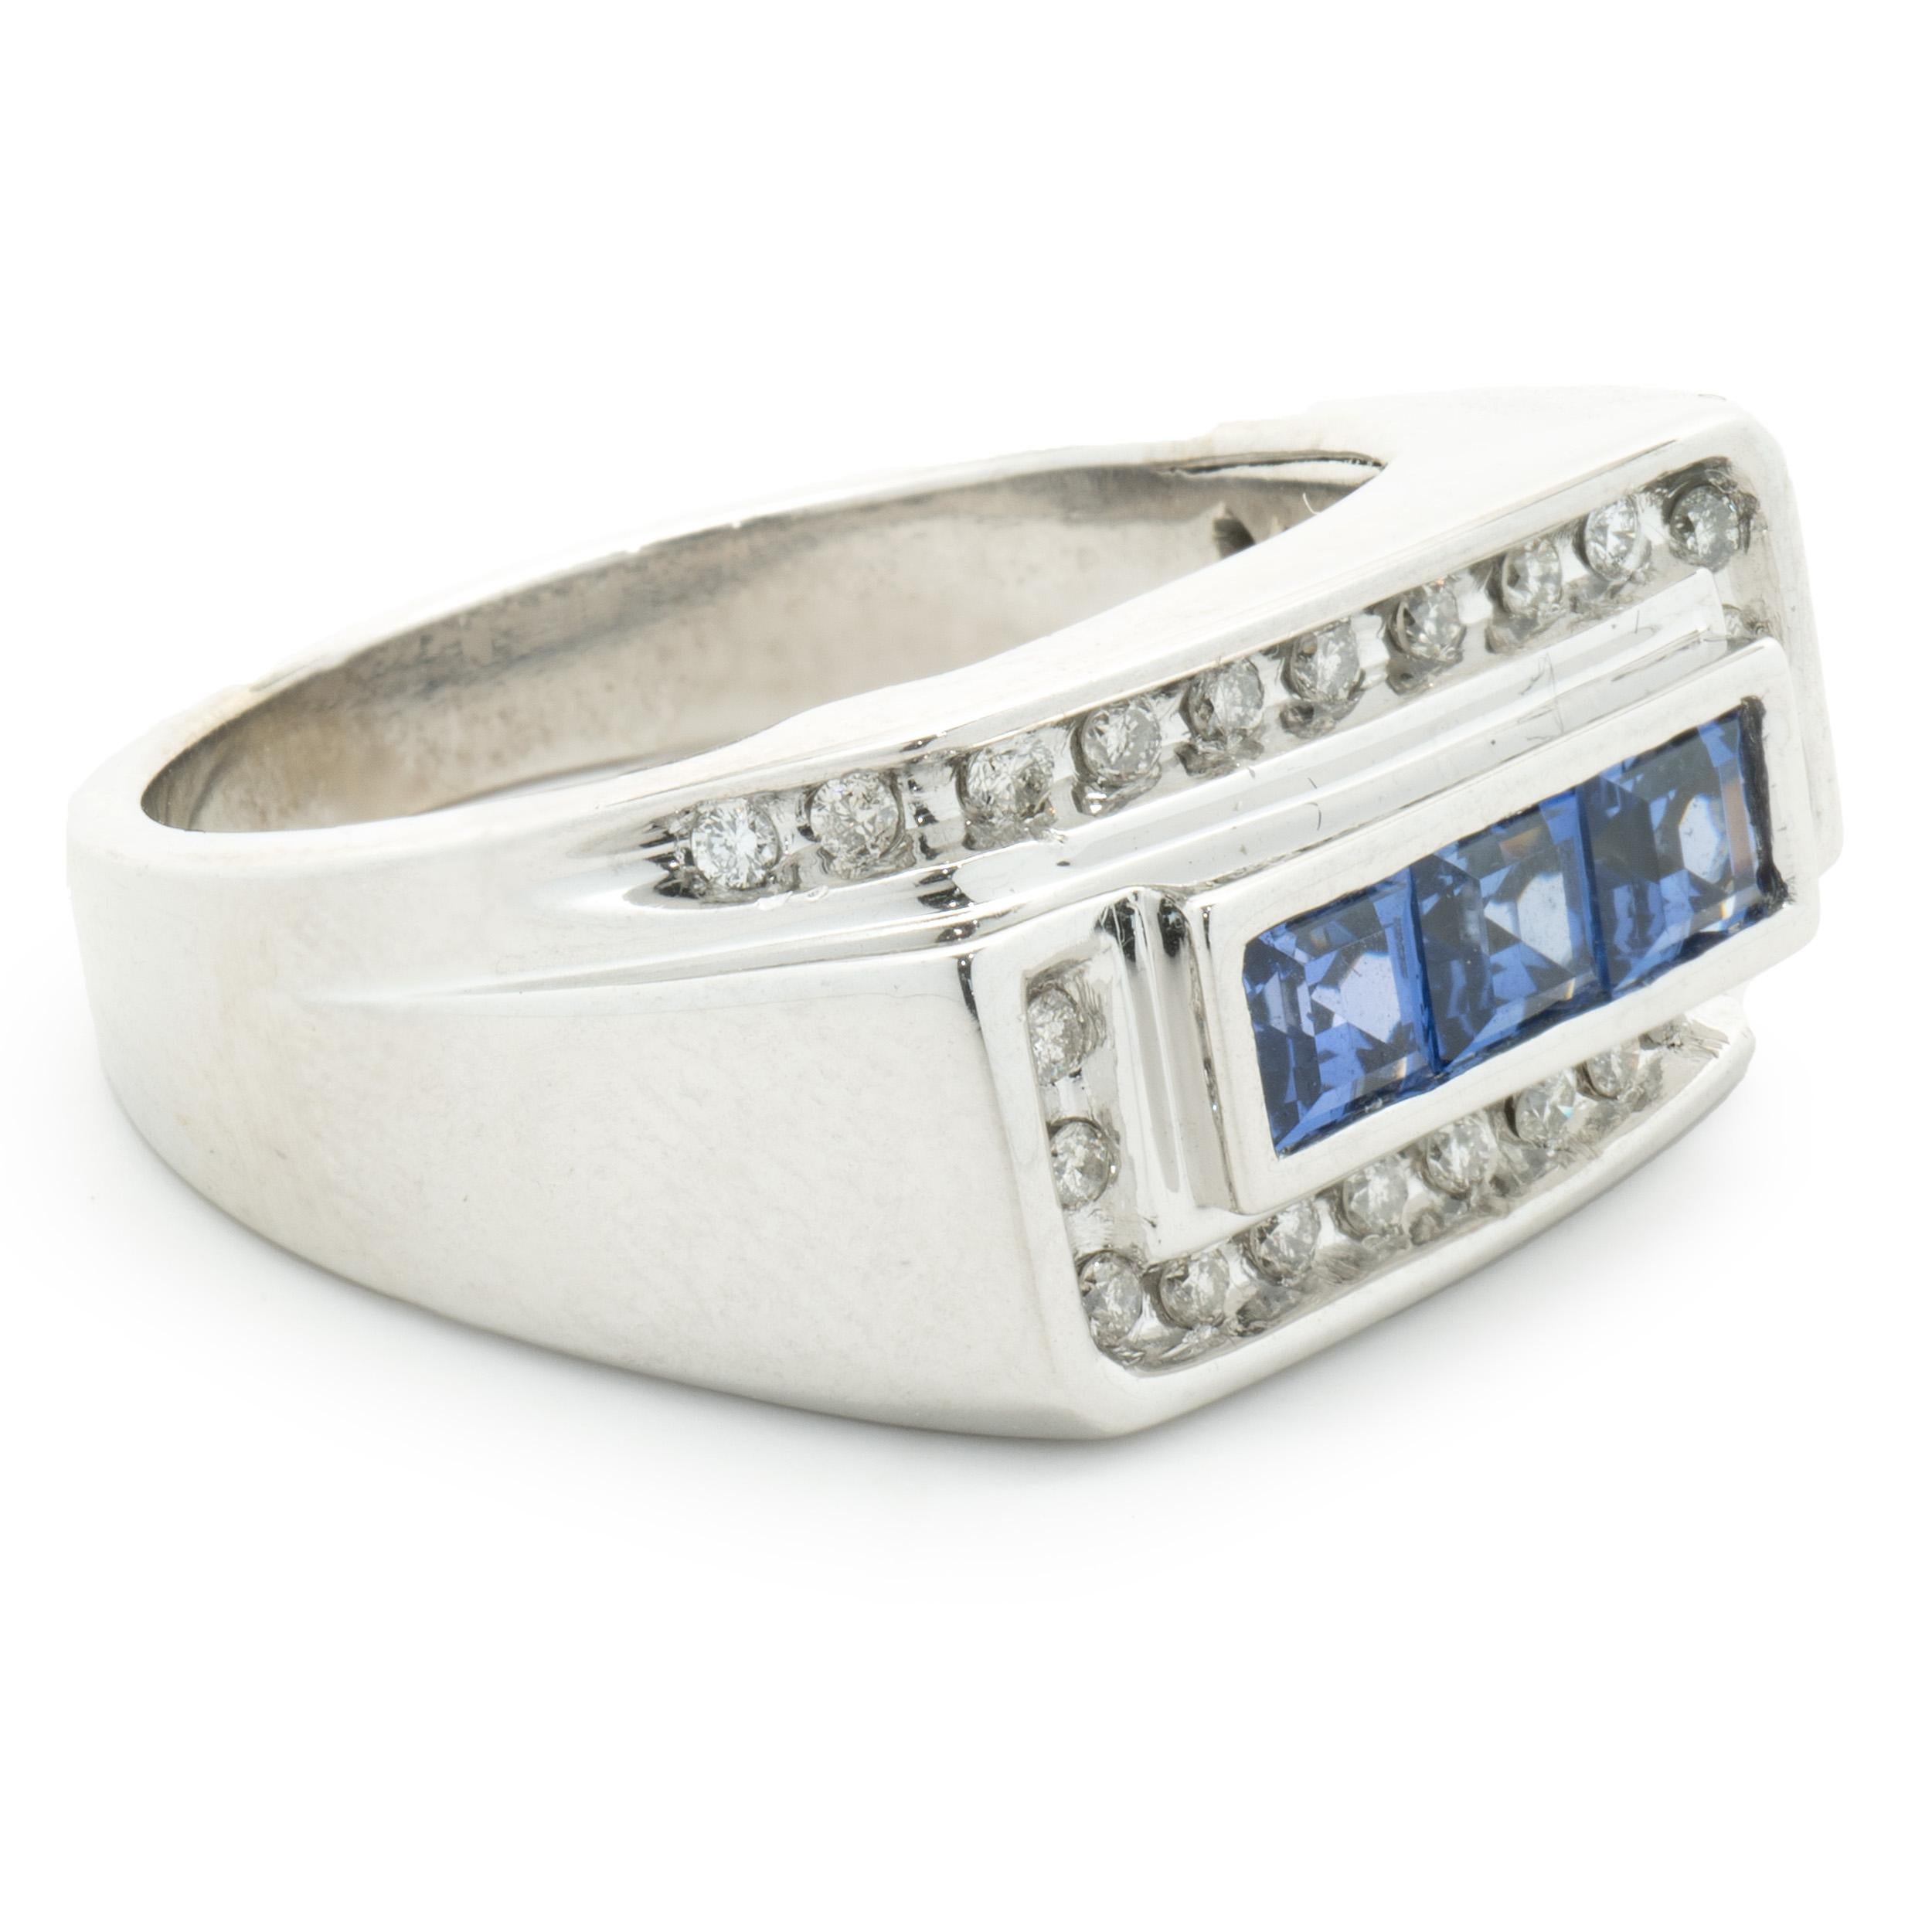 Designer: custom design
Material: 10K white gold
Diamond: 24 round cut = .24cttw
Color: I
Clarity: SI2
Sapphire: 3 princess cut = 0.90cttw
Dimensions: ring top measures 11mm wide
Ring Size: 9.5 (please allow two extra shipping days for sizing